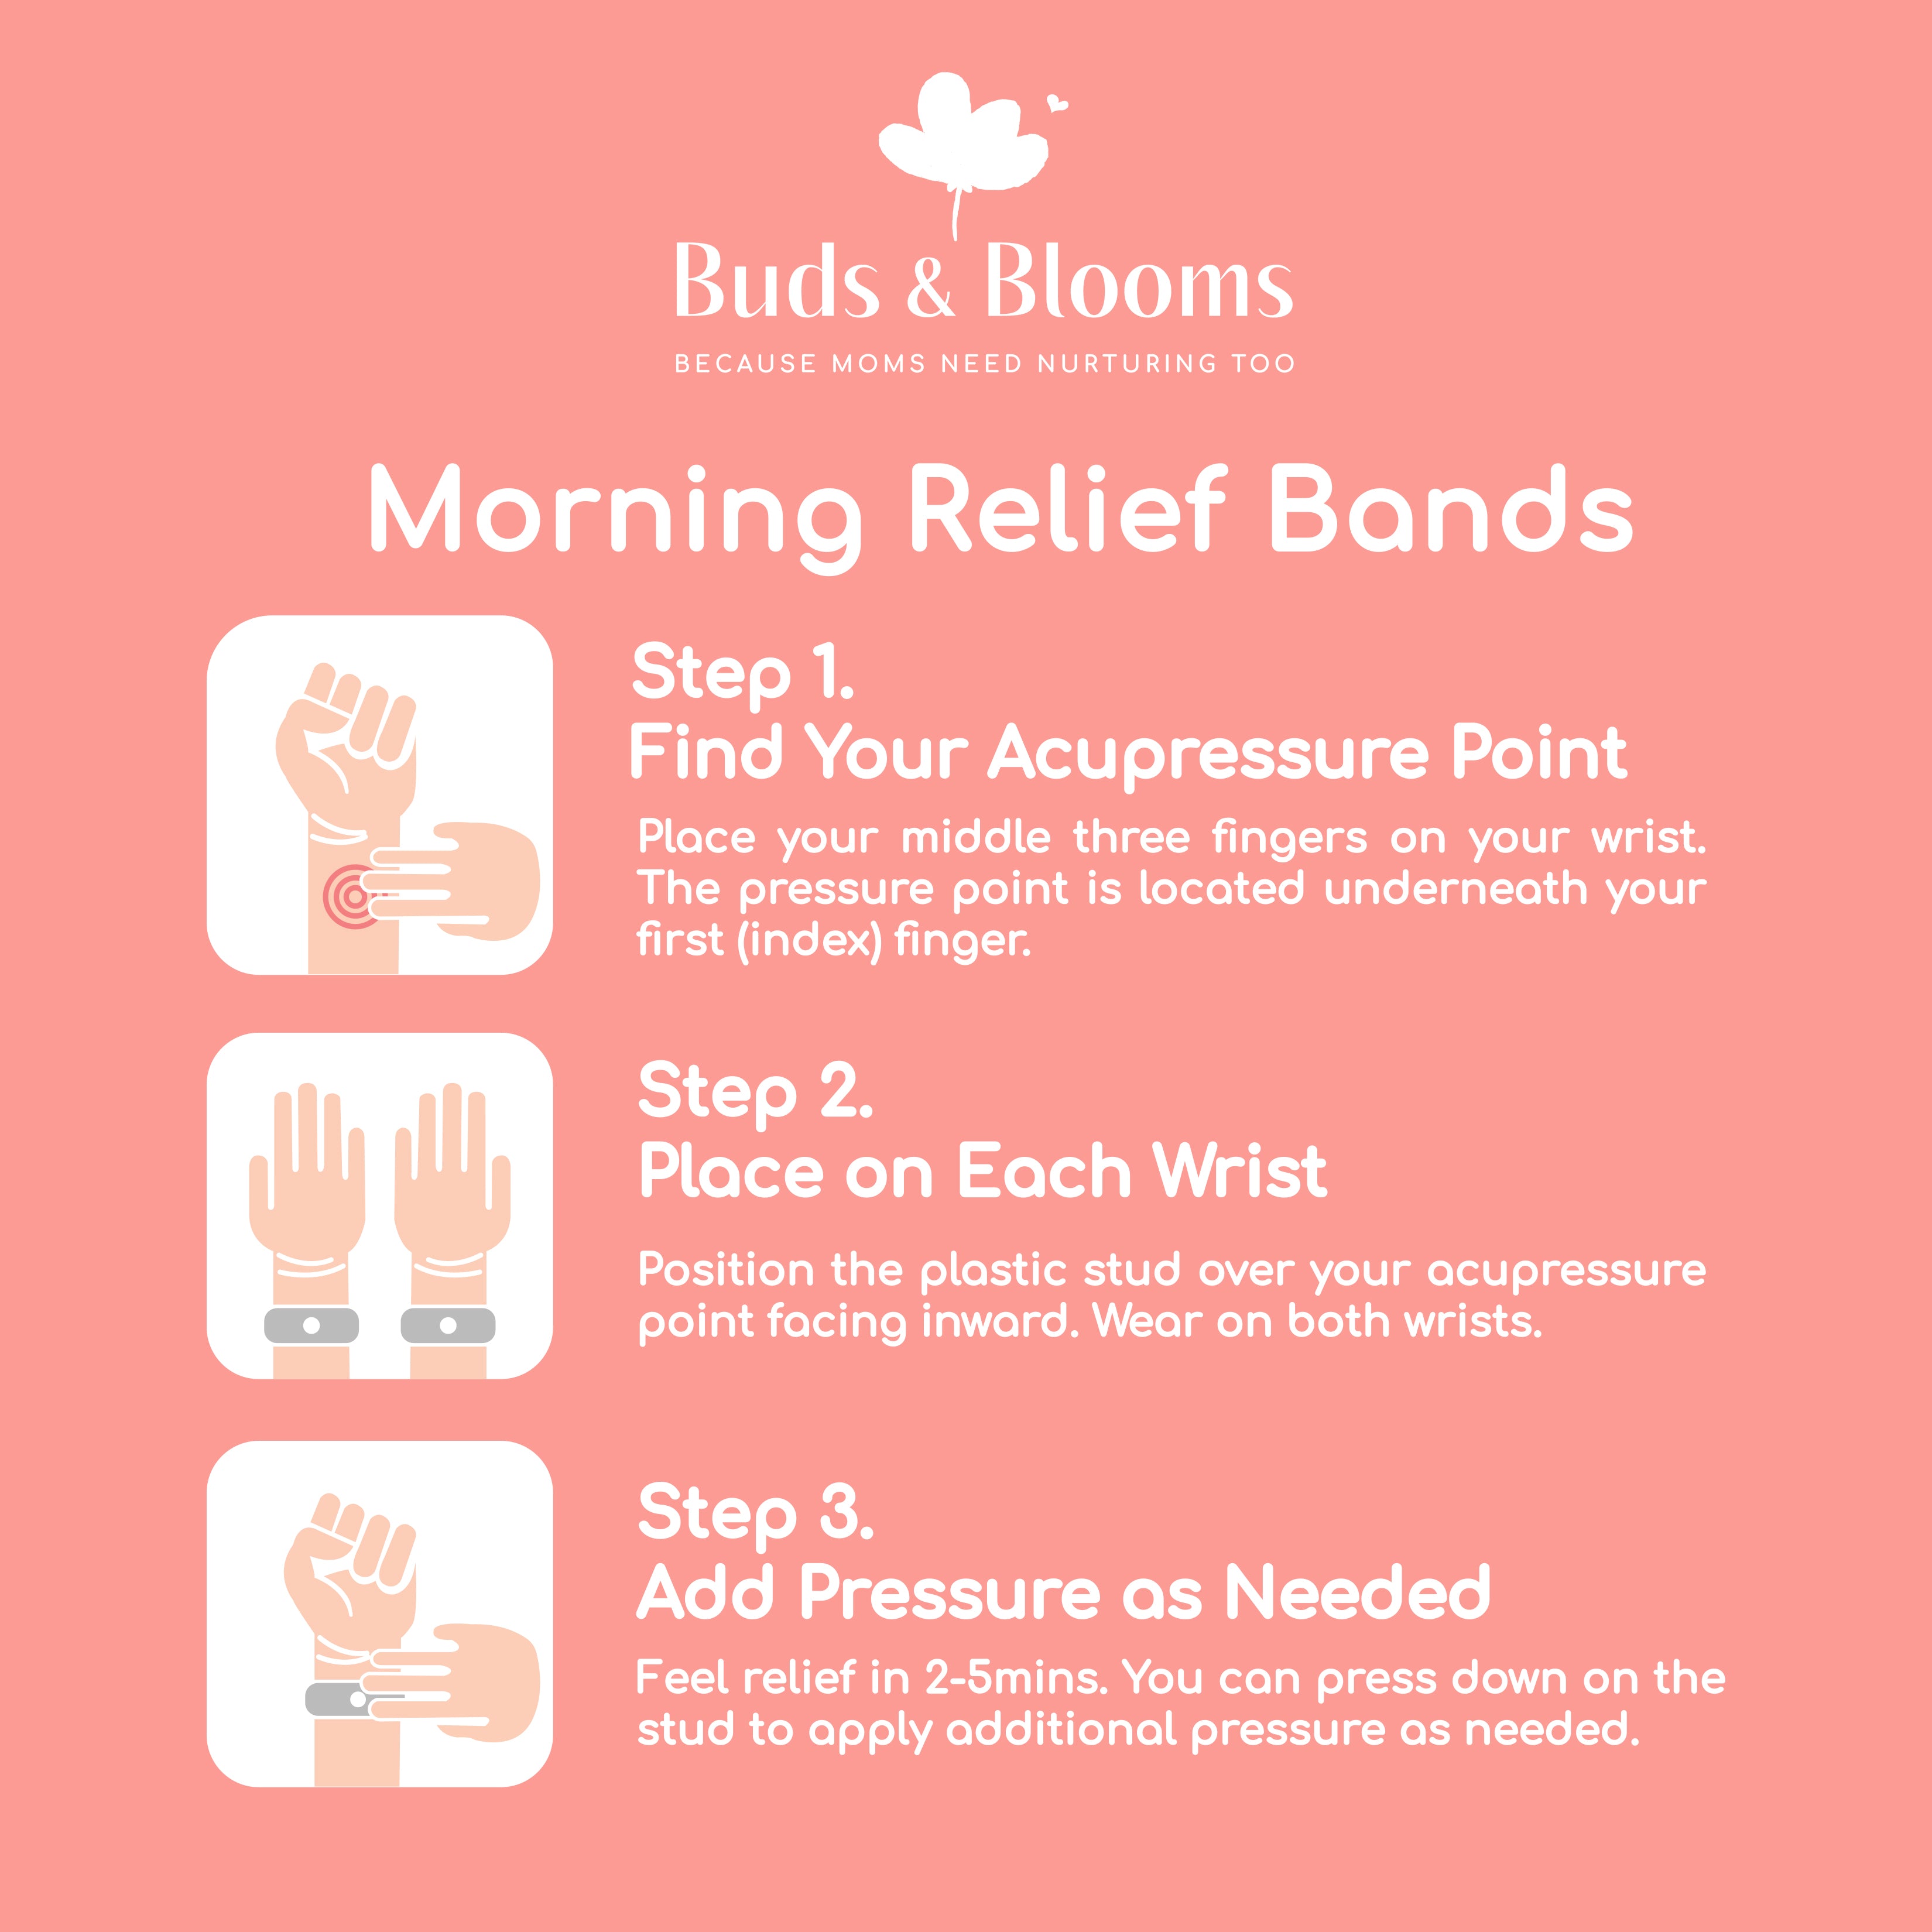 Buds & Blooms Morning Relief Bands